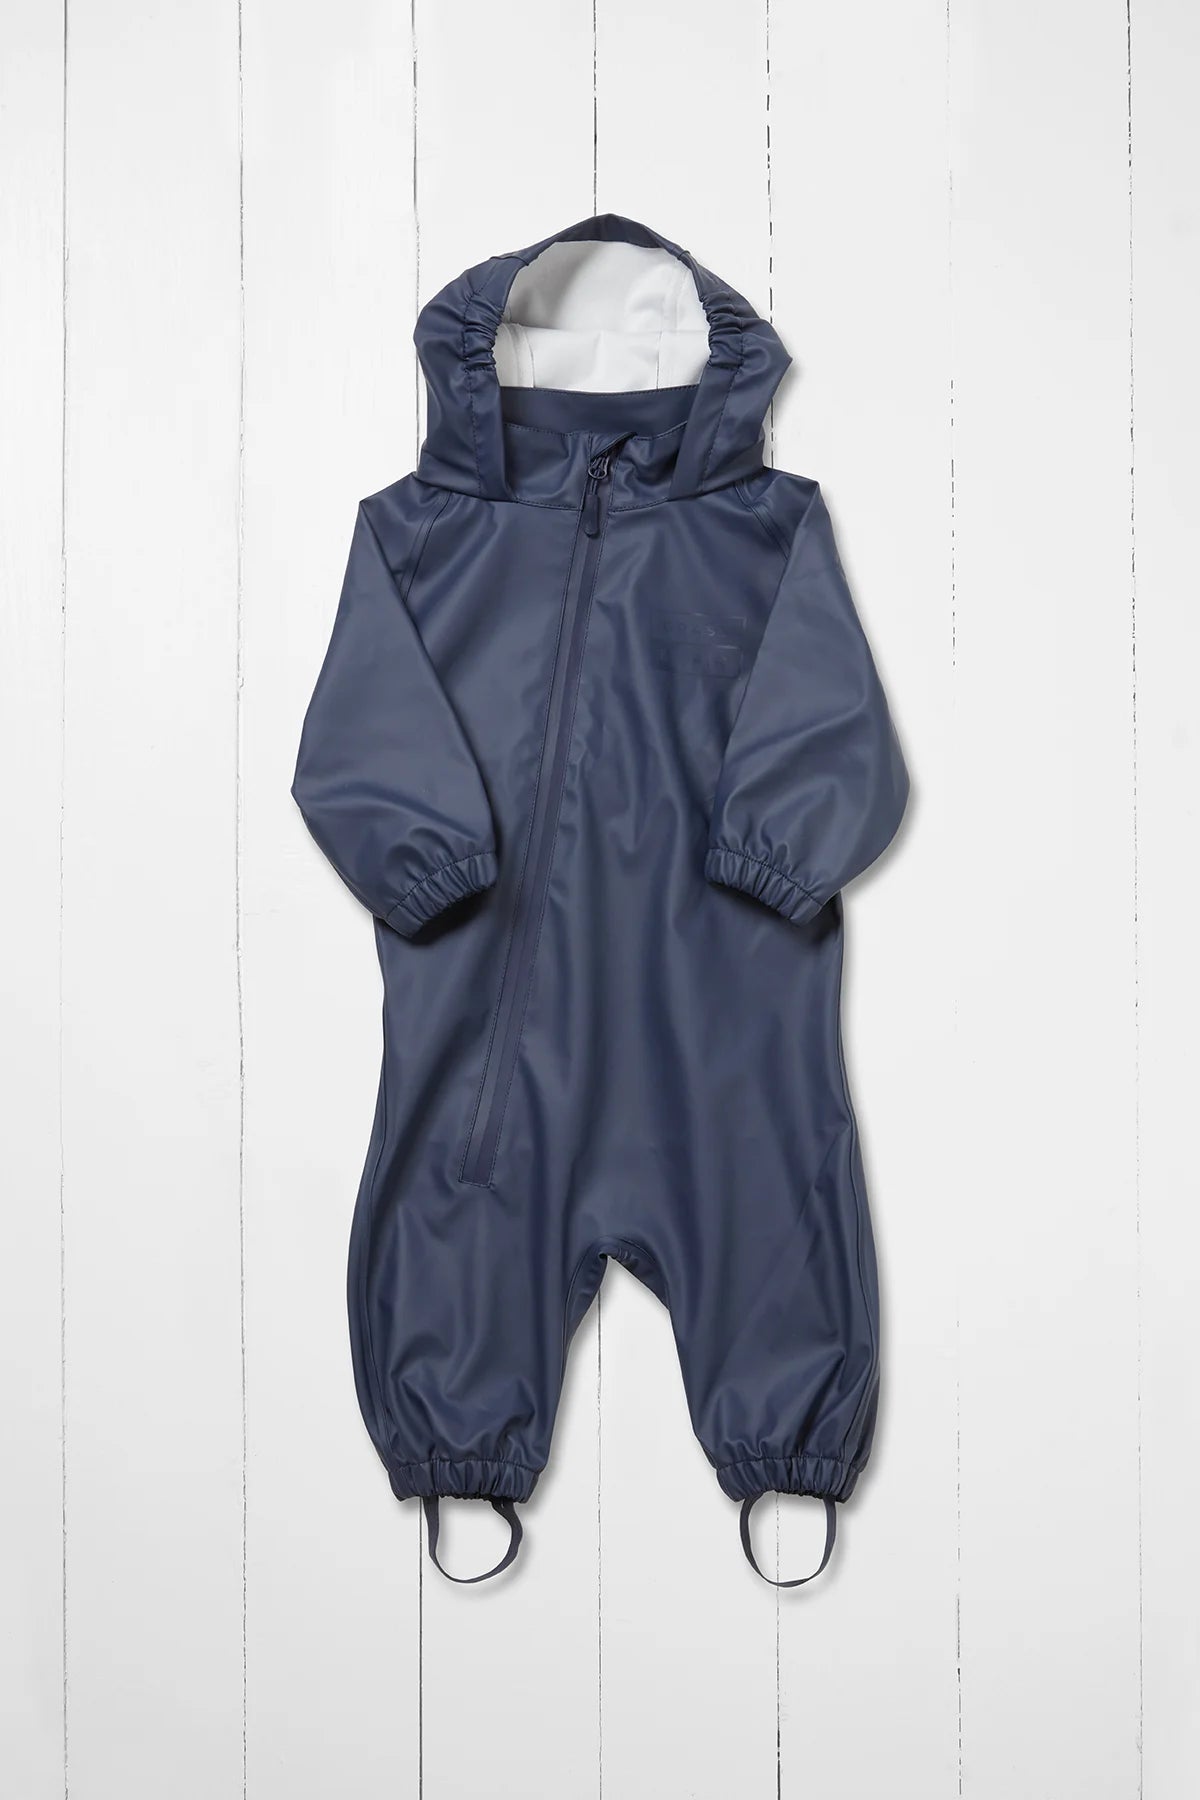 Navy Puddle Stomper Suit